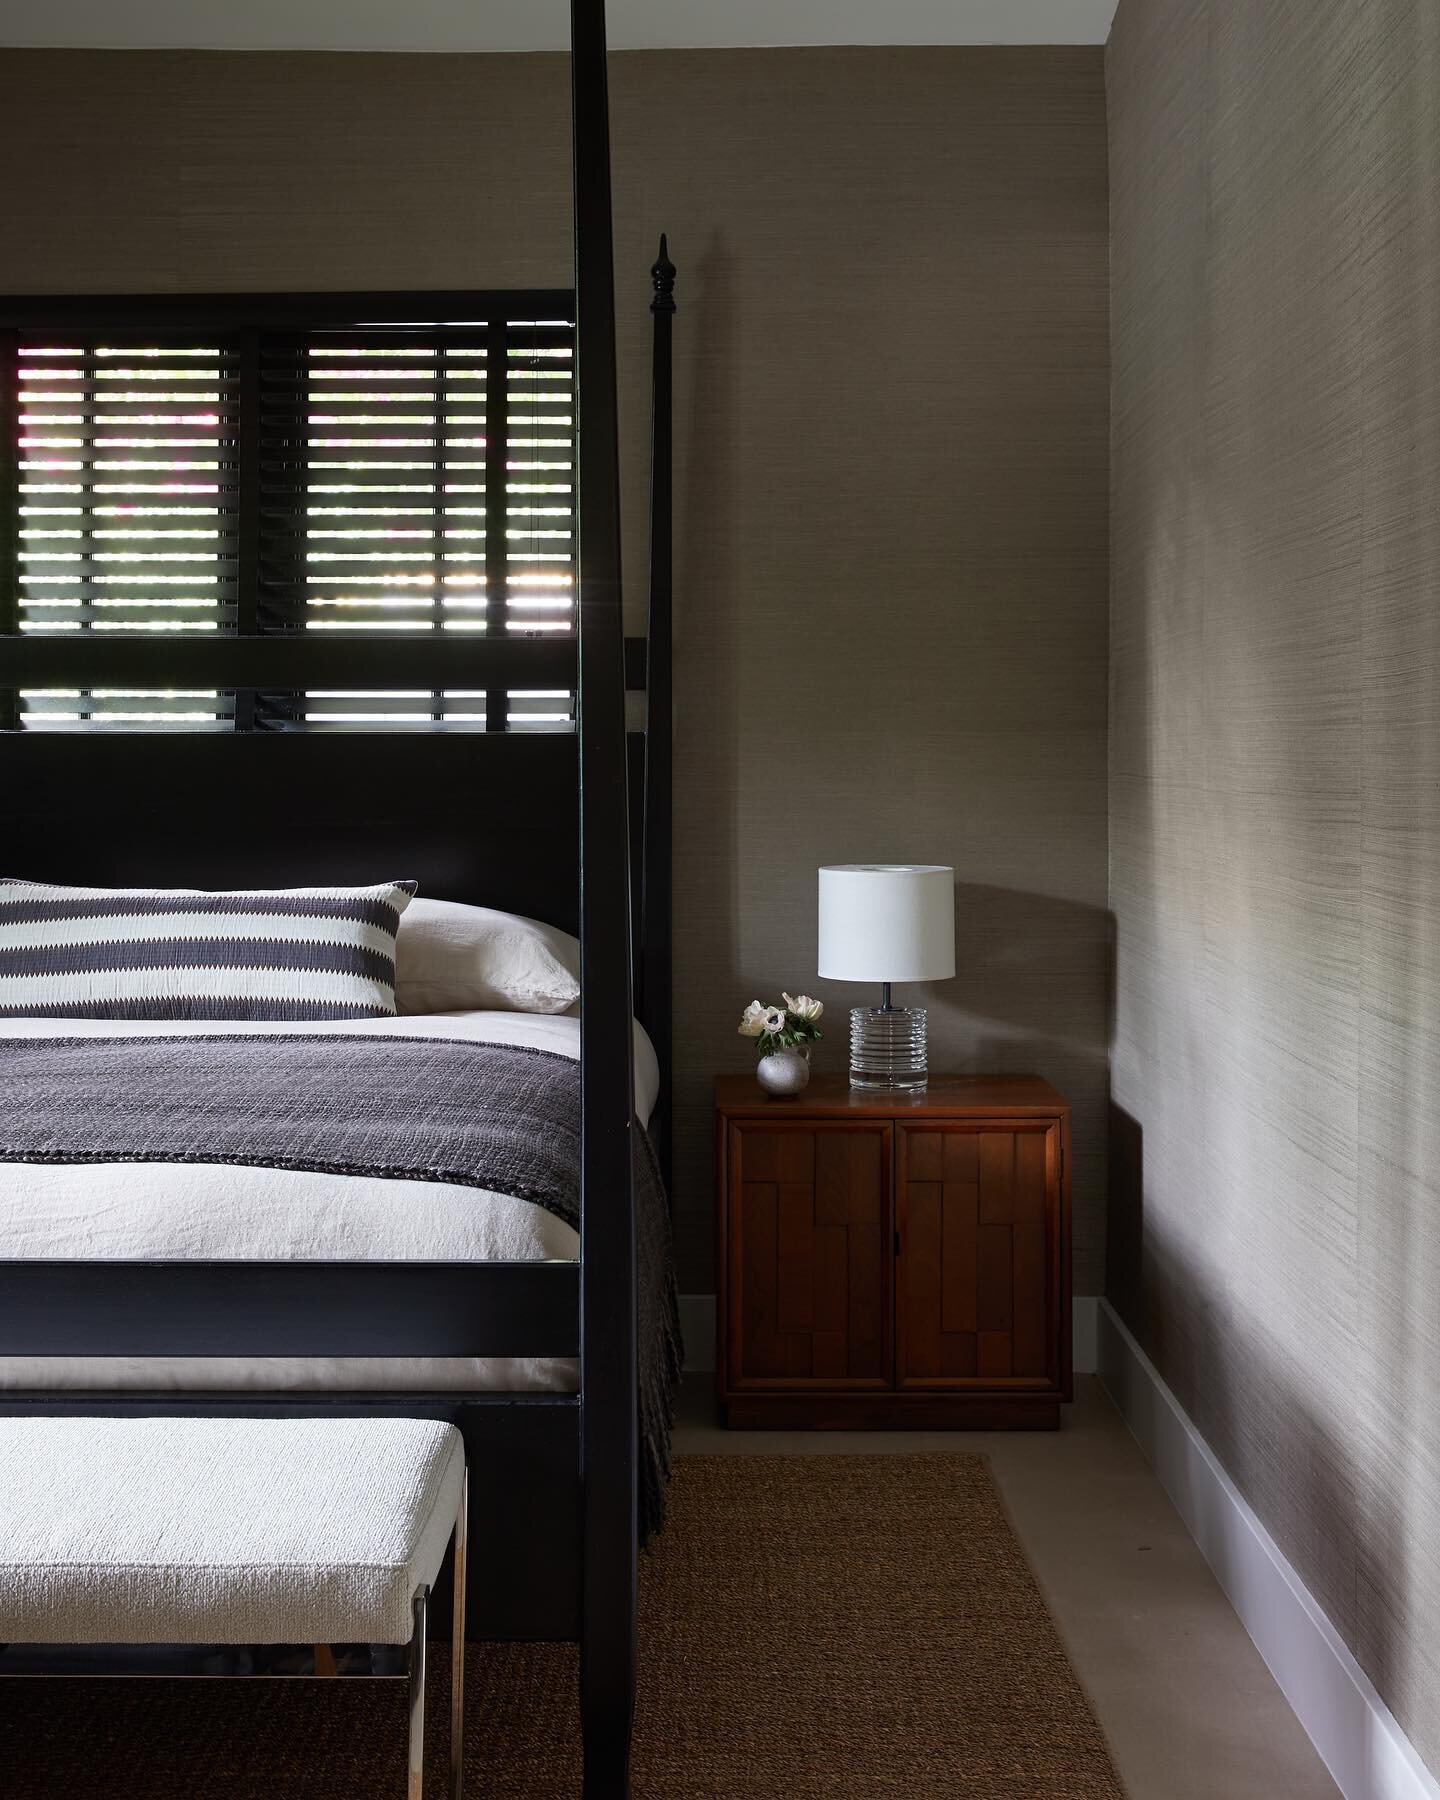 Guest bedroom from our Miami Beach project.